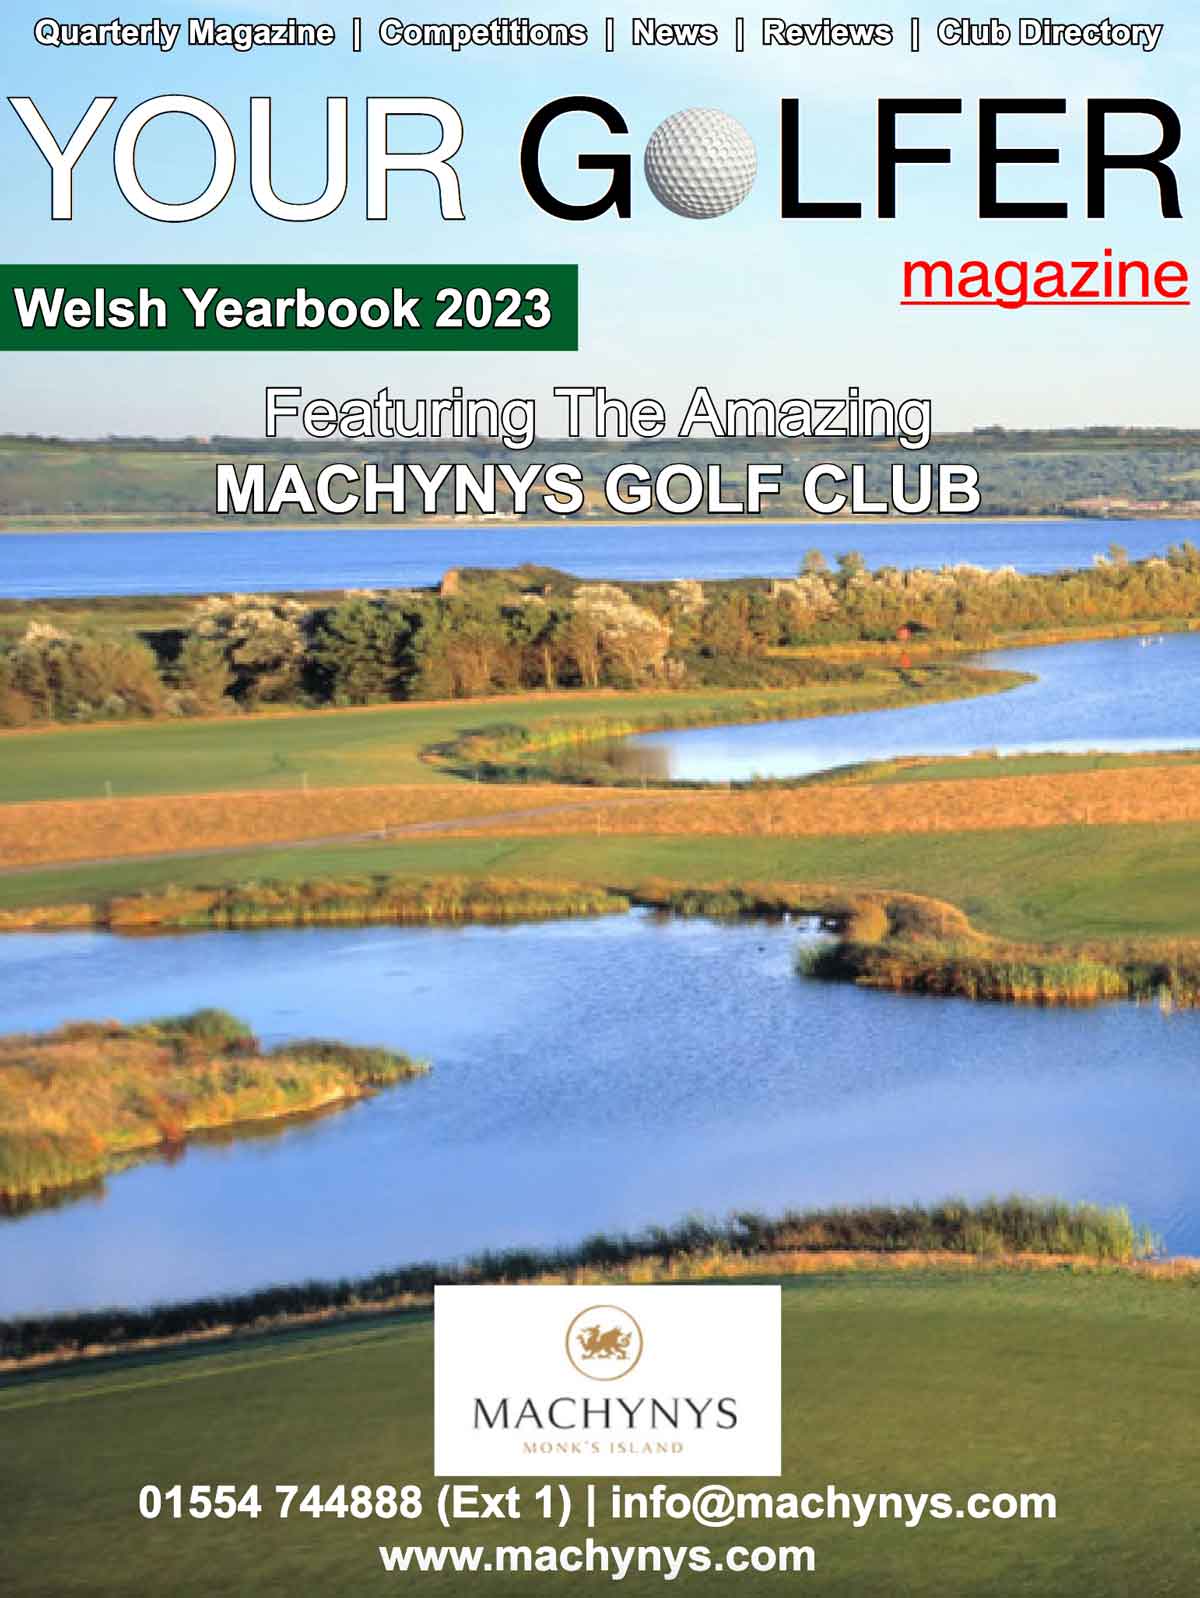 Your Golfer Magazines presents Welsh Yearbook 2023